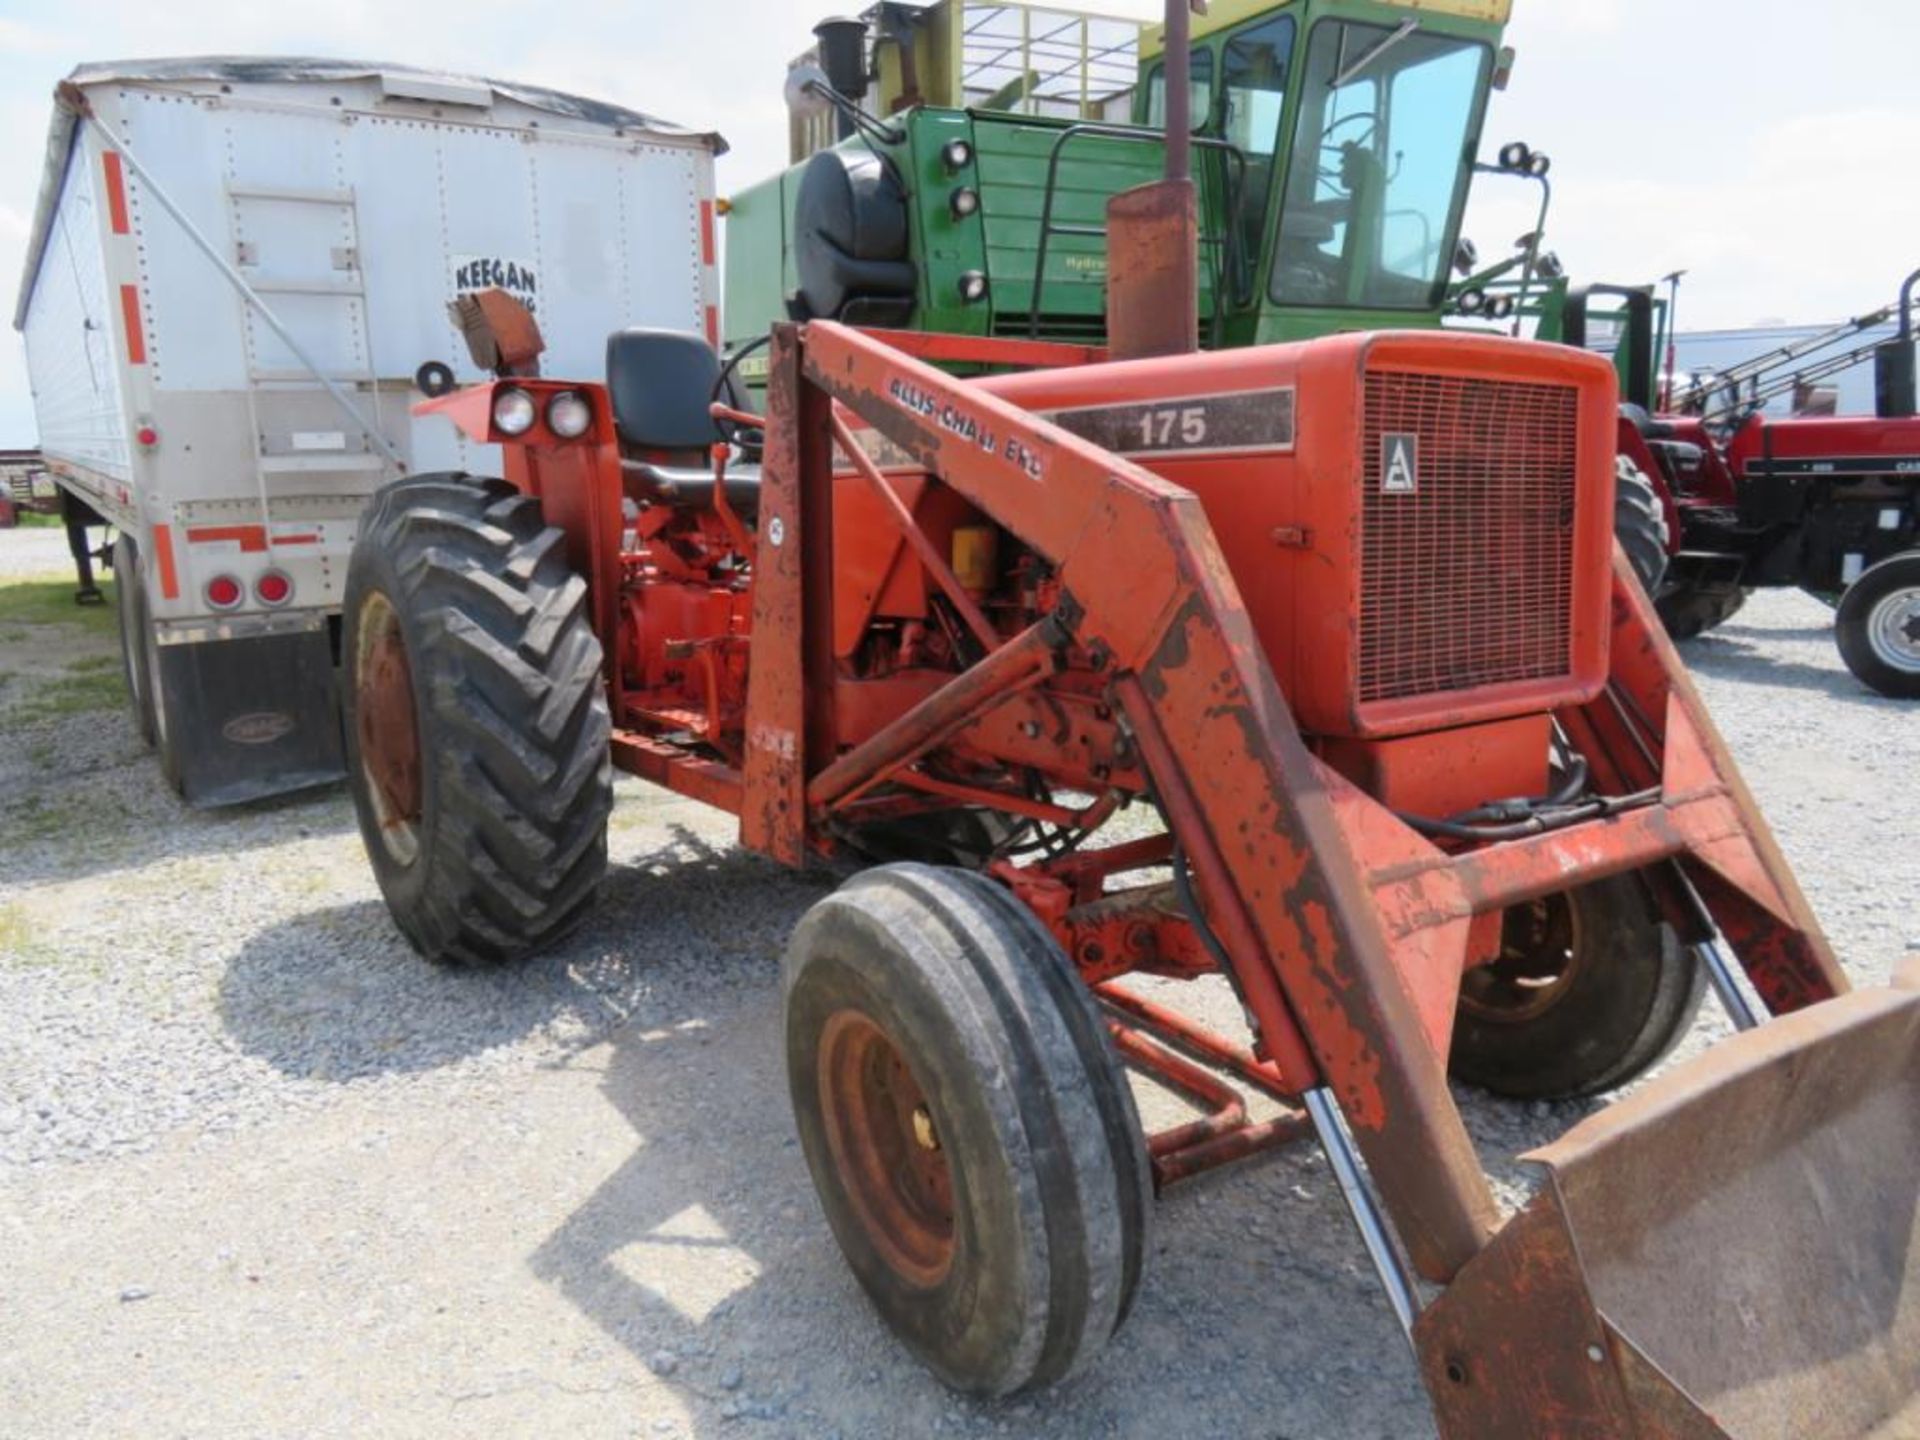 1974 Allis Chalmers 175 gas tractor wide front, w/Allis Chalmers 517 loader (runs excellent) - Image 4 of 20